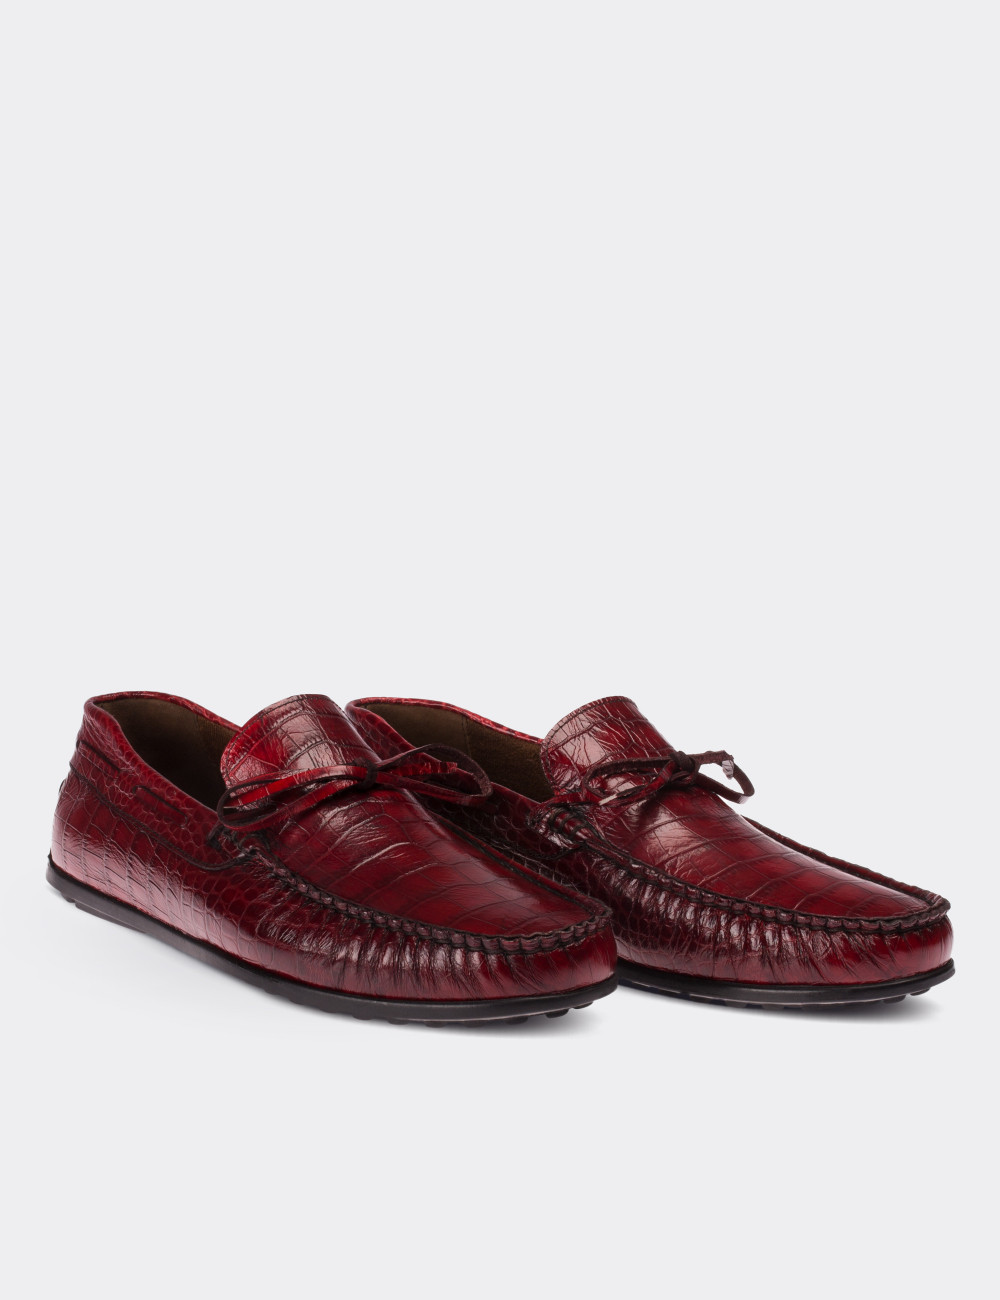 Burgundy Patent Leather Loafers - 01647MBRDC02